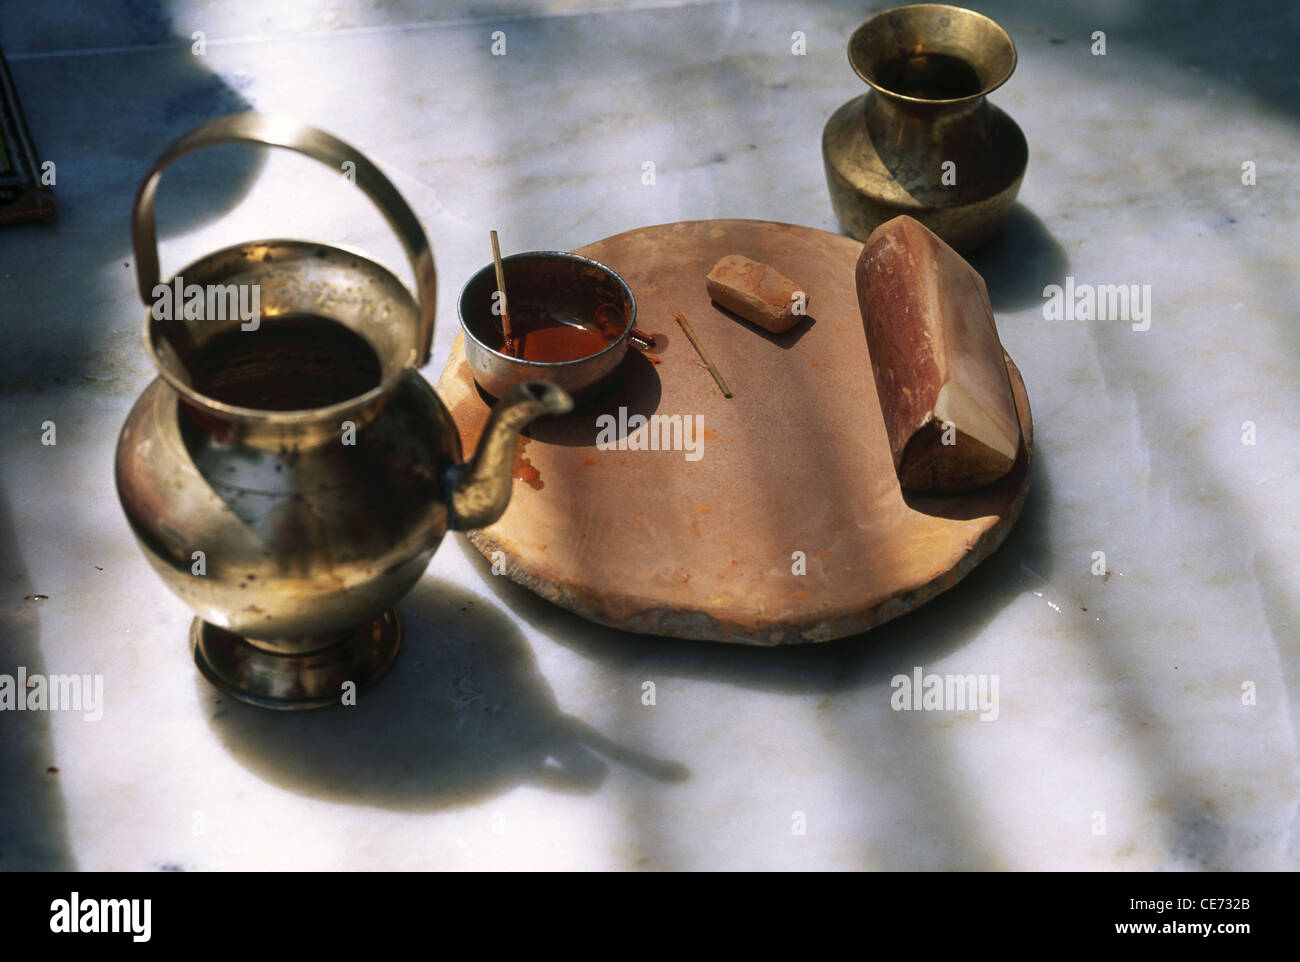 VHM 81806 : sandalwood paste making plate and water container kalash India Stock Photo